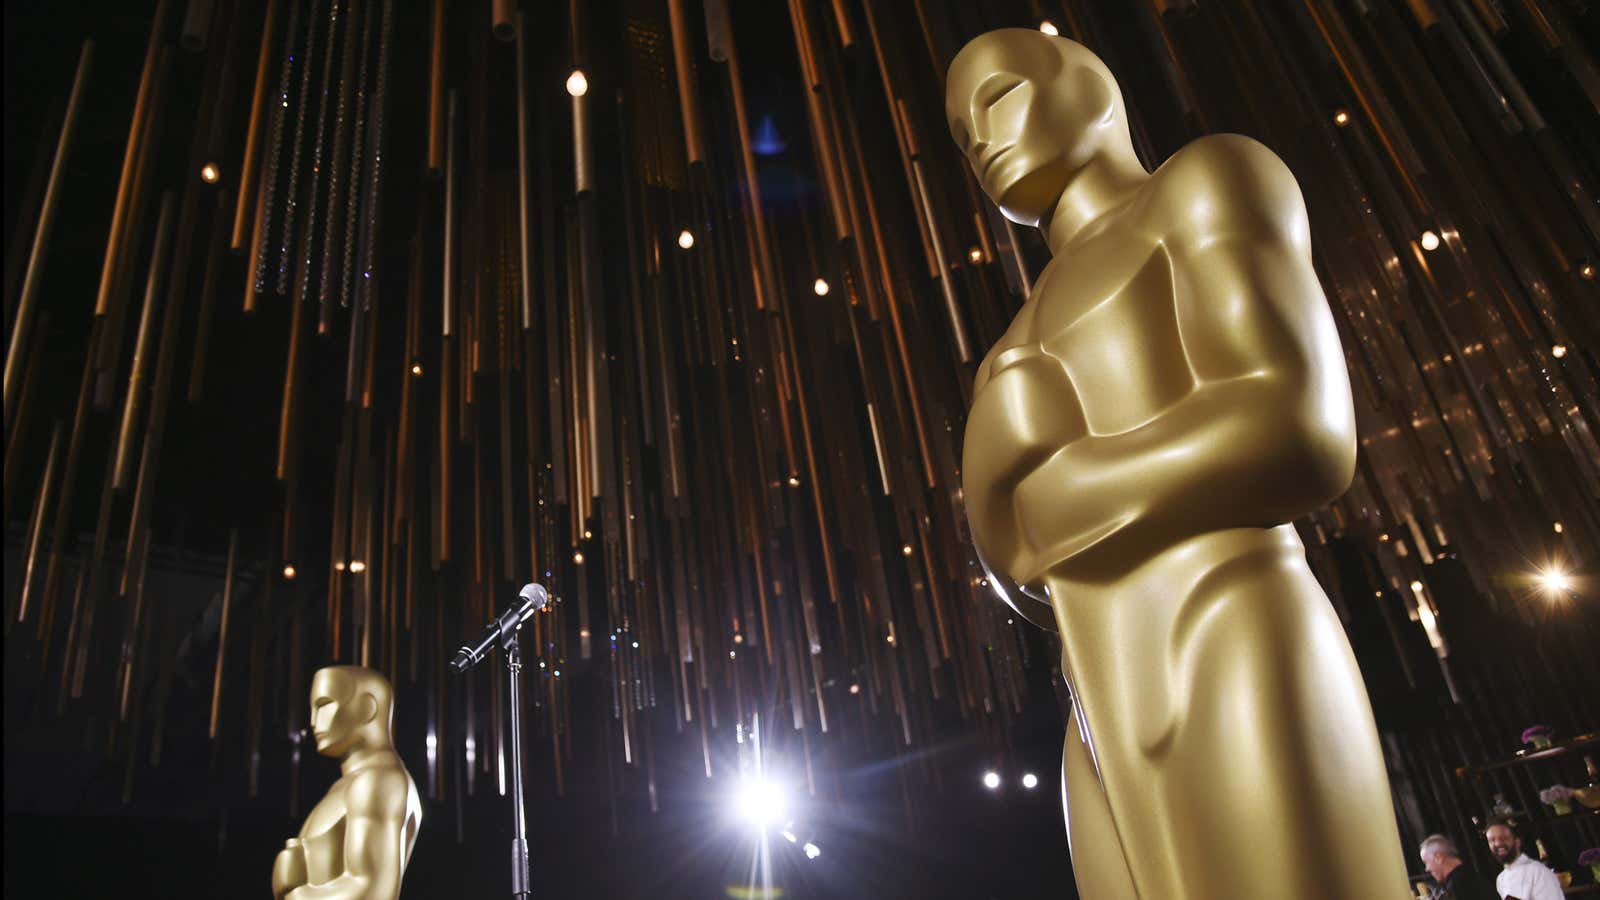 Oscars 2020: A film's legacy isn't shaped by the Academy Awards